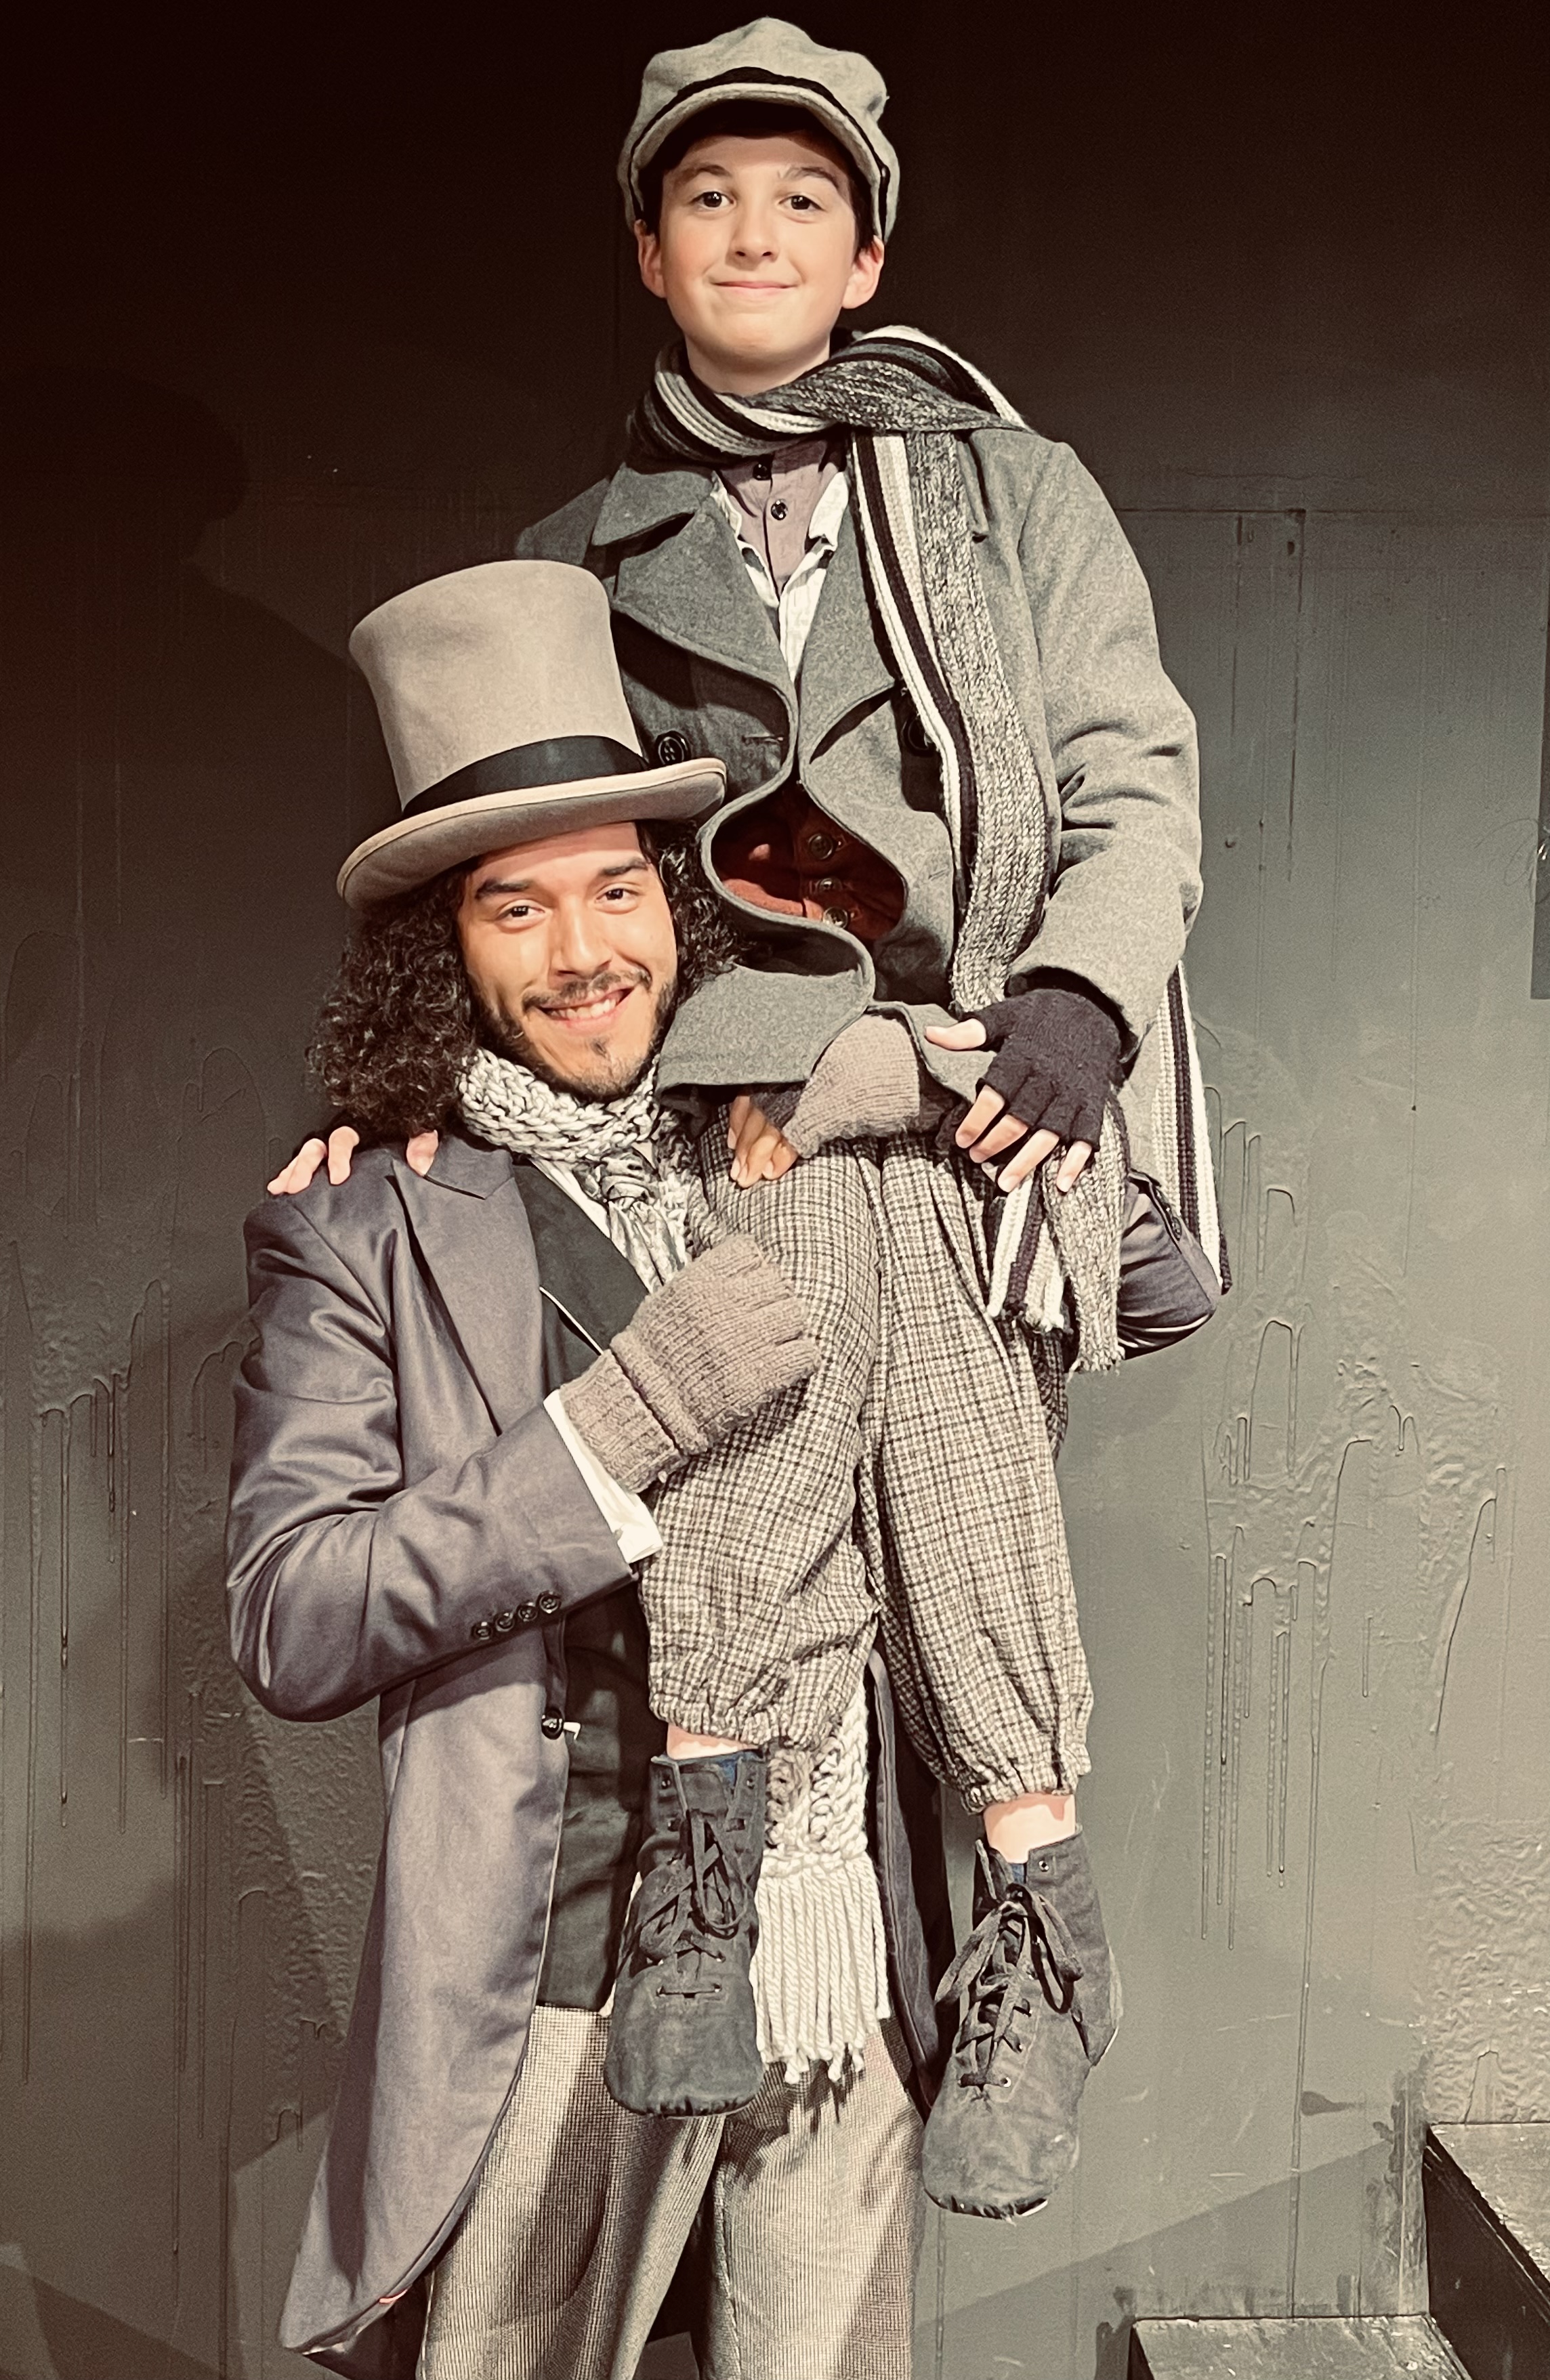 Bob Cratchit played by Giovanni Marine and Tiny Tim played by Giovanni Ladd